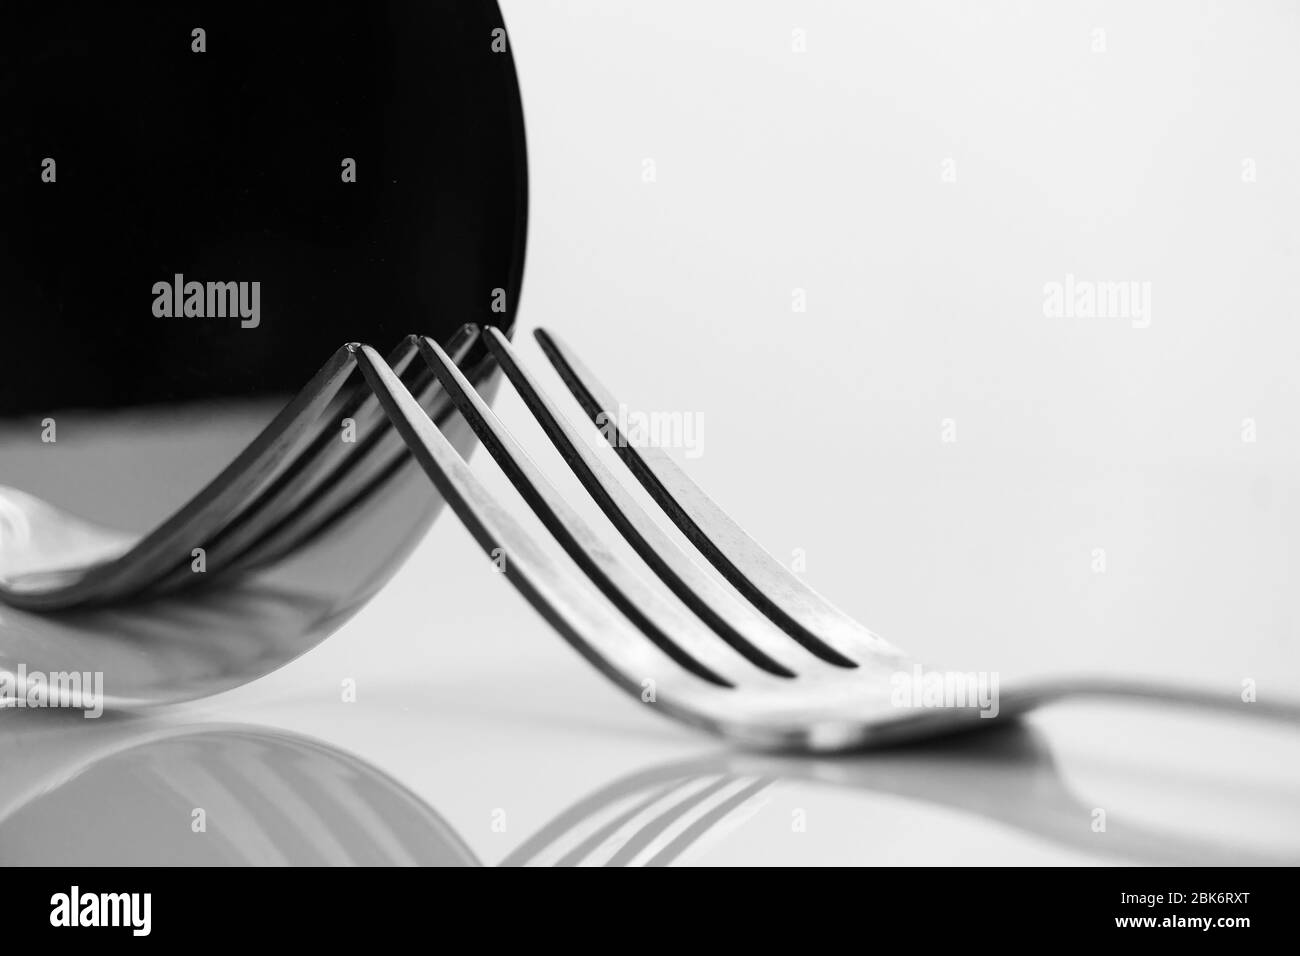 luxury metal fork for food elegant dinner still life reflection on round mirror black and white classic background Stock Photo